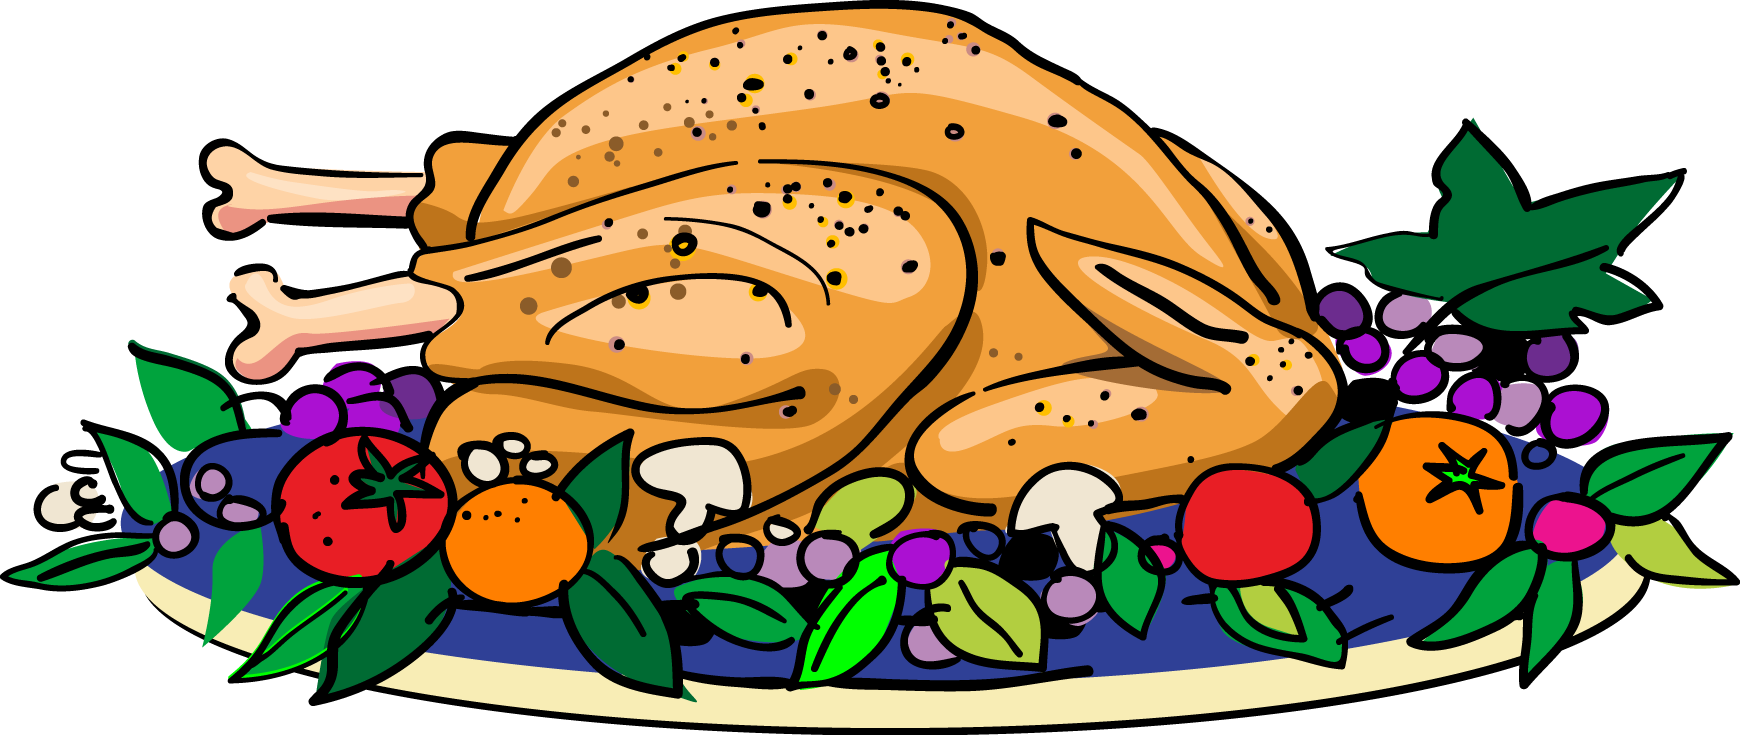 17 Roasted Turkey Clipart Free Cliparts That You Can Download To You